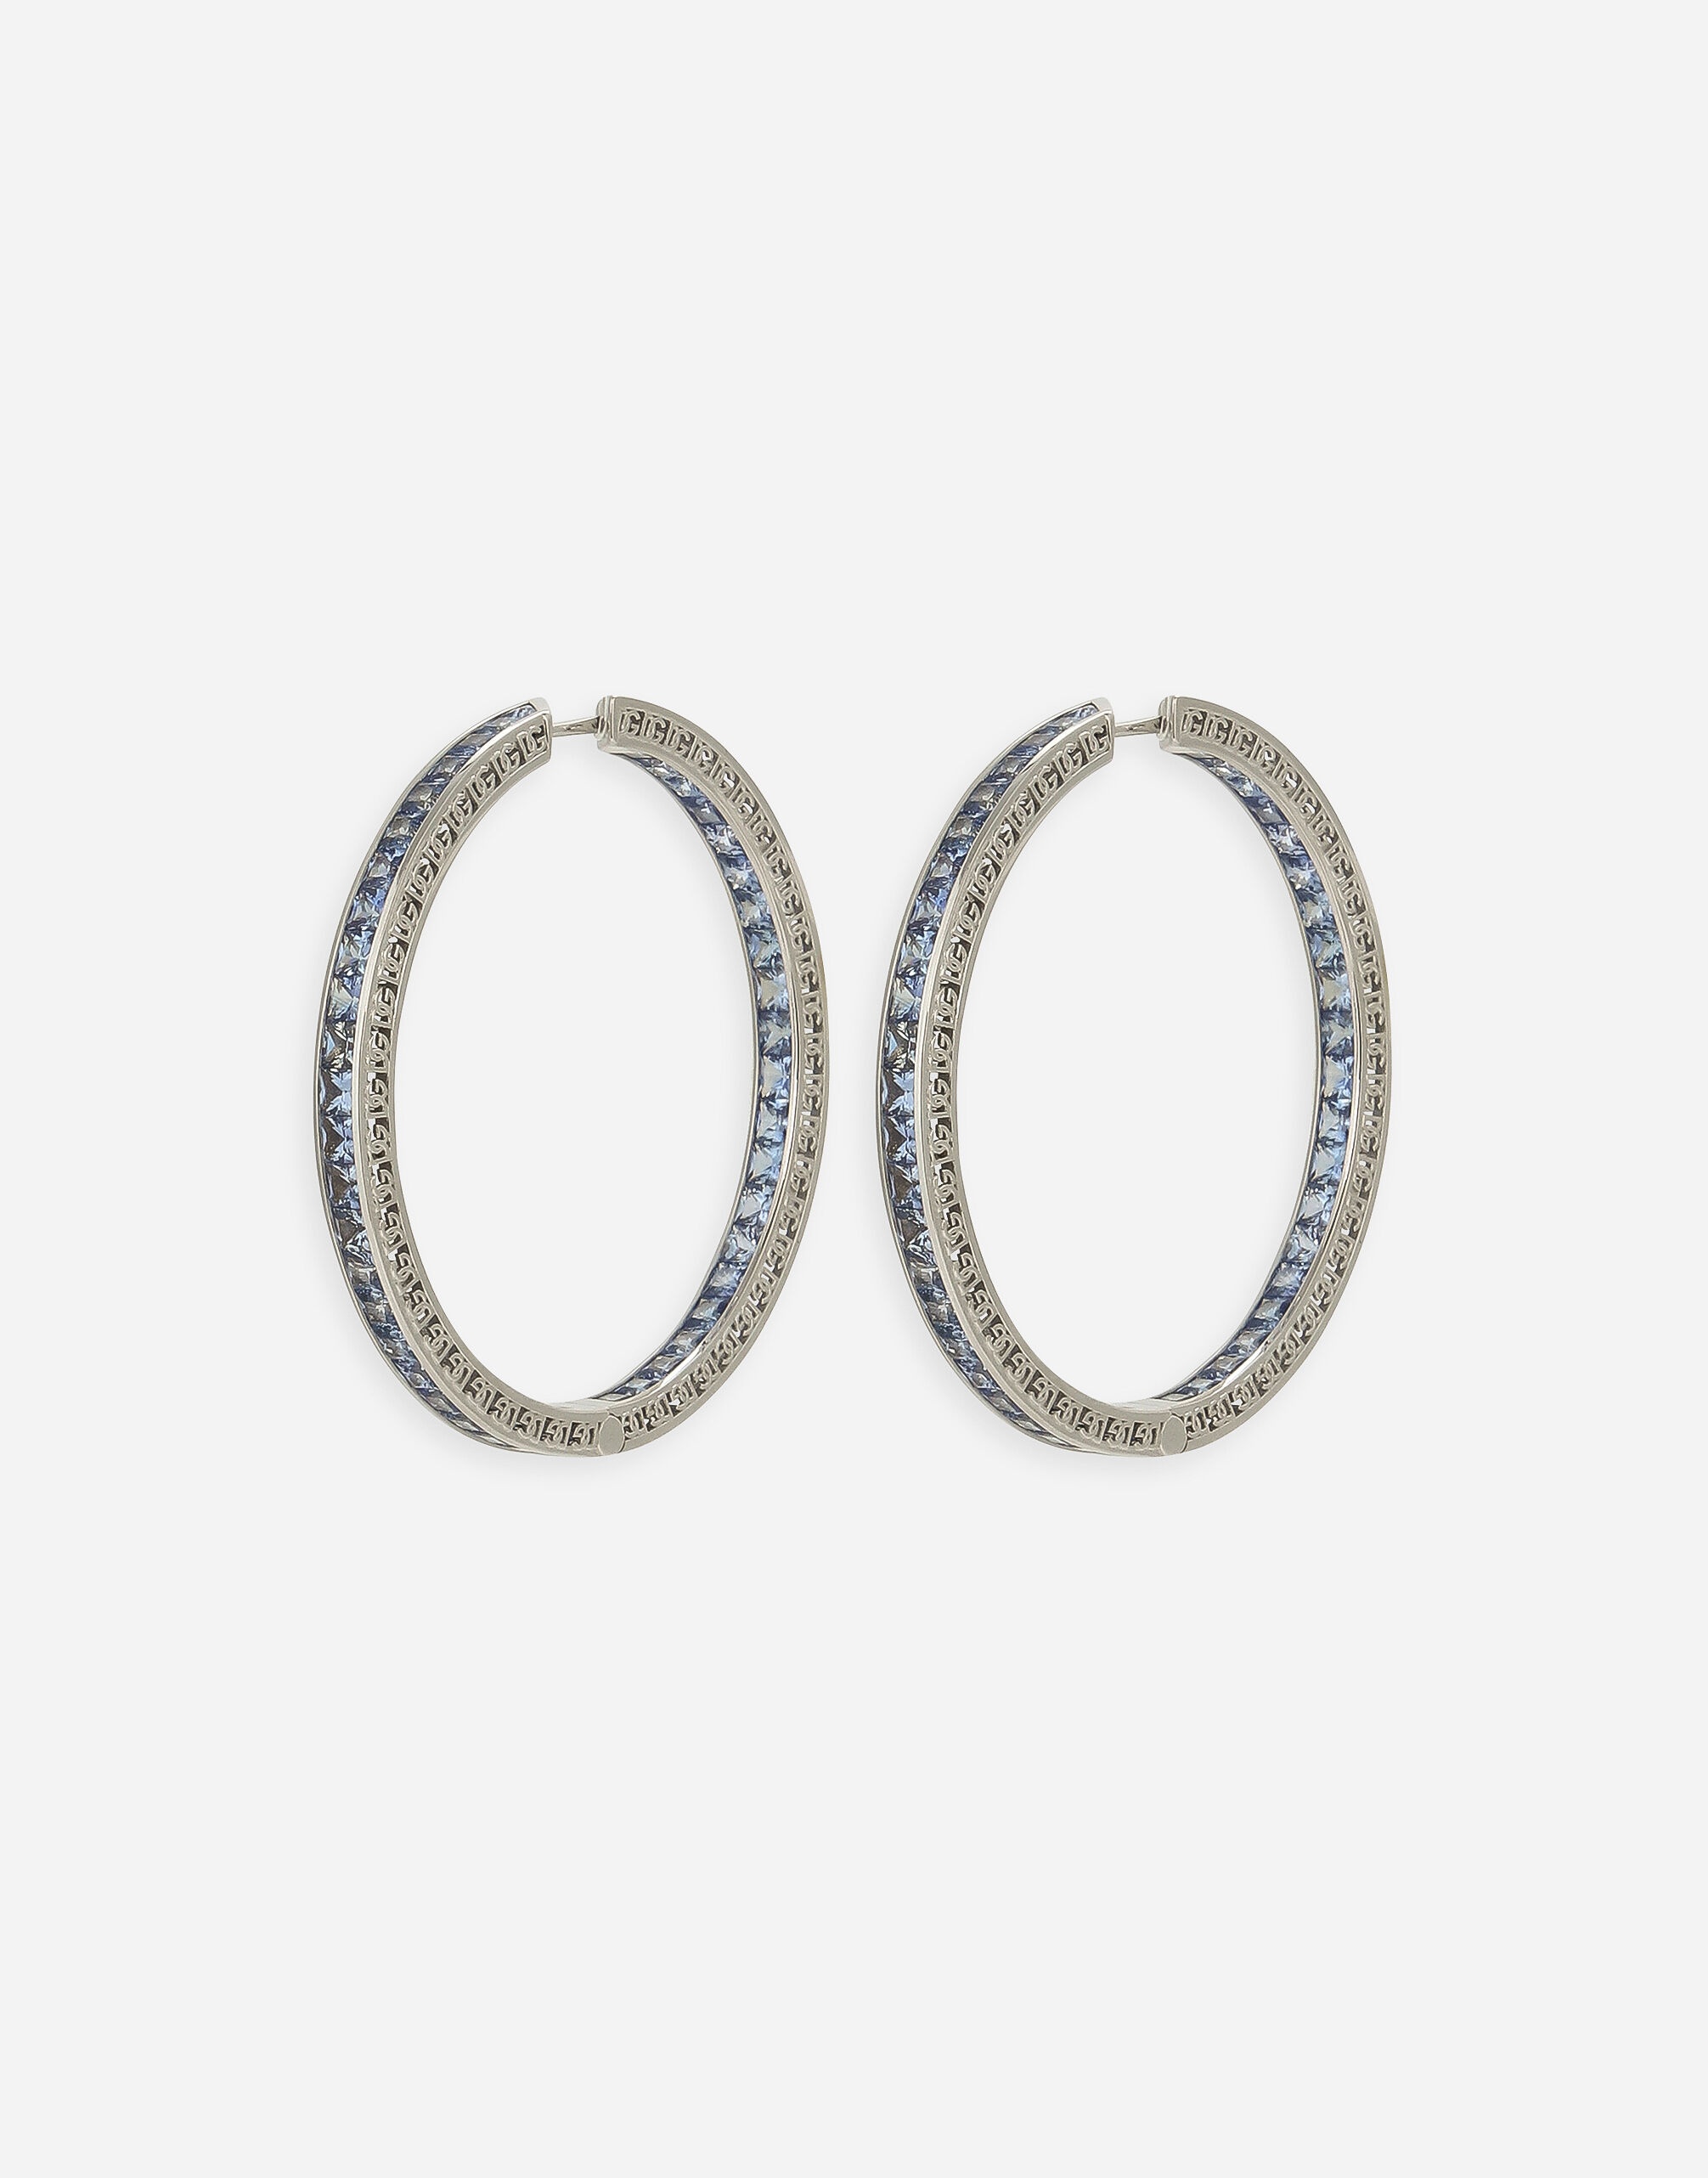 Anna earrings in white gold 18kt with blue sapphires - 4